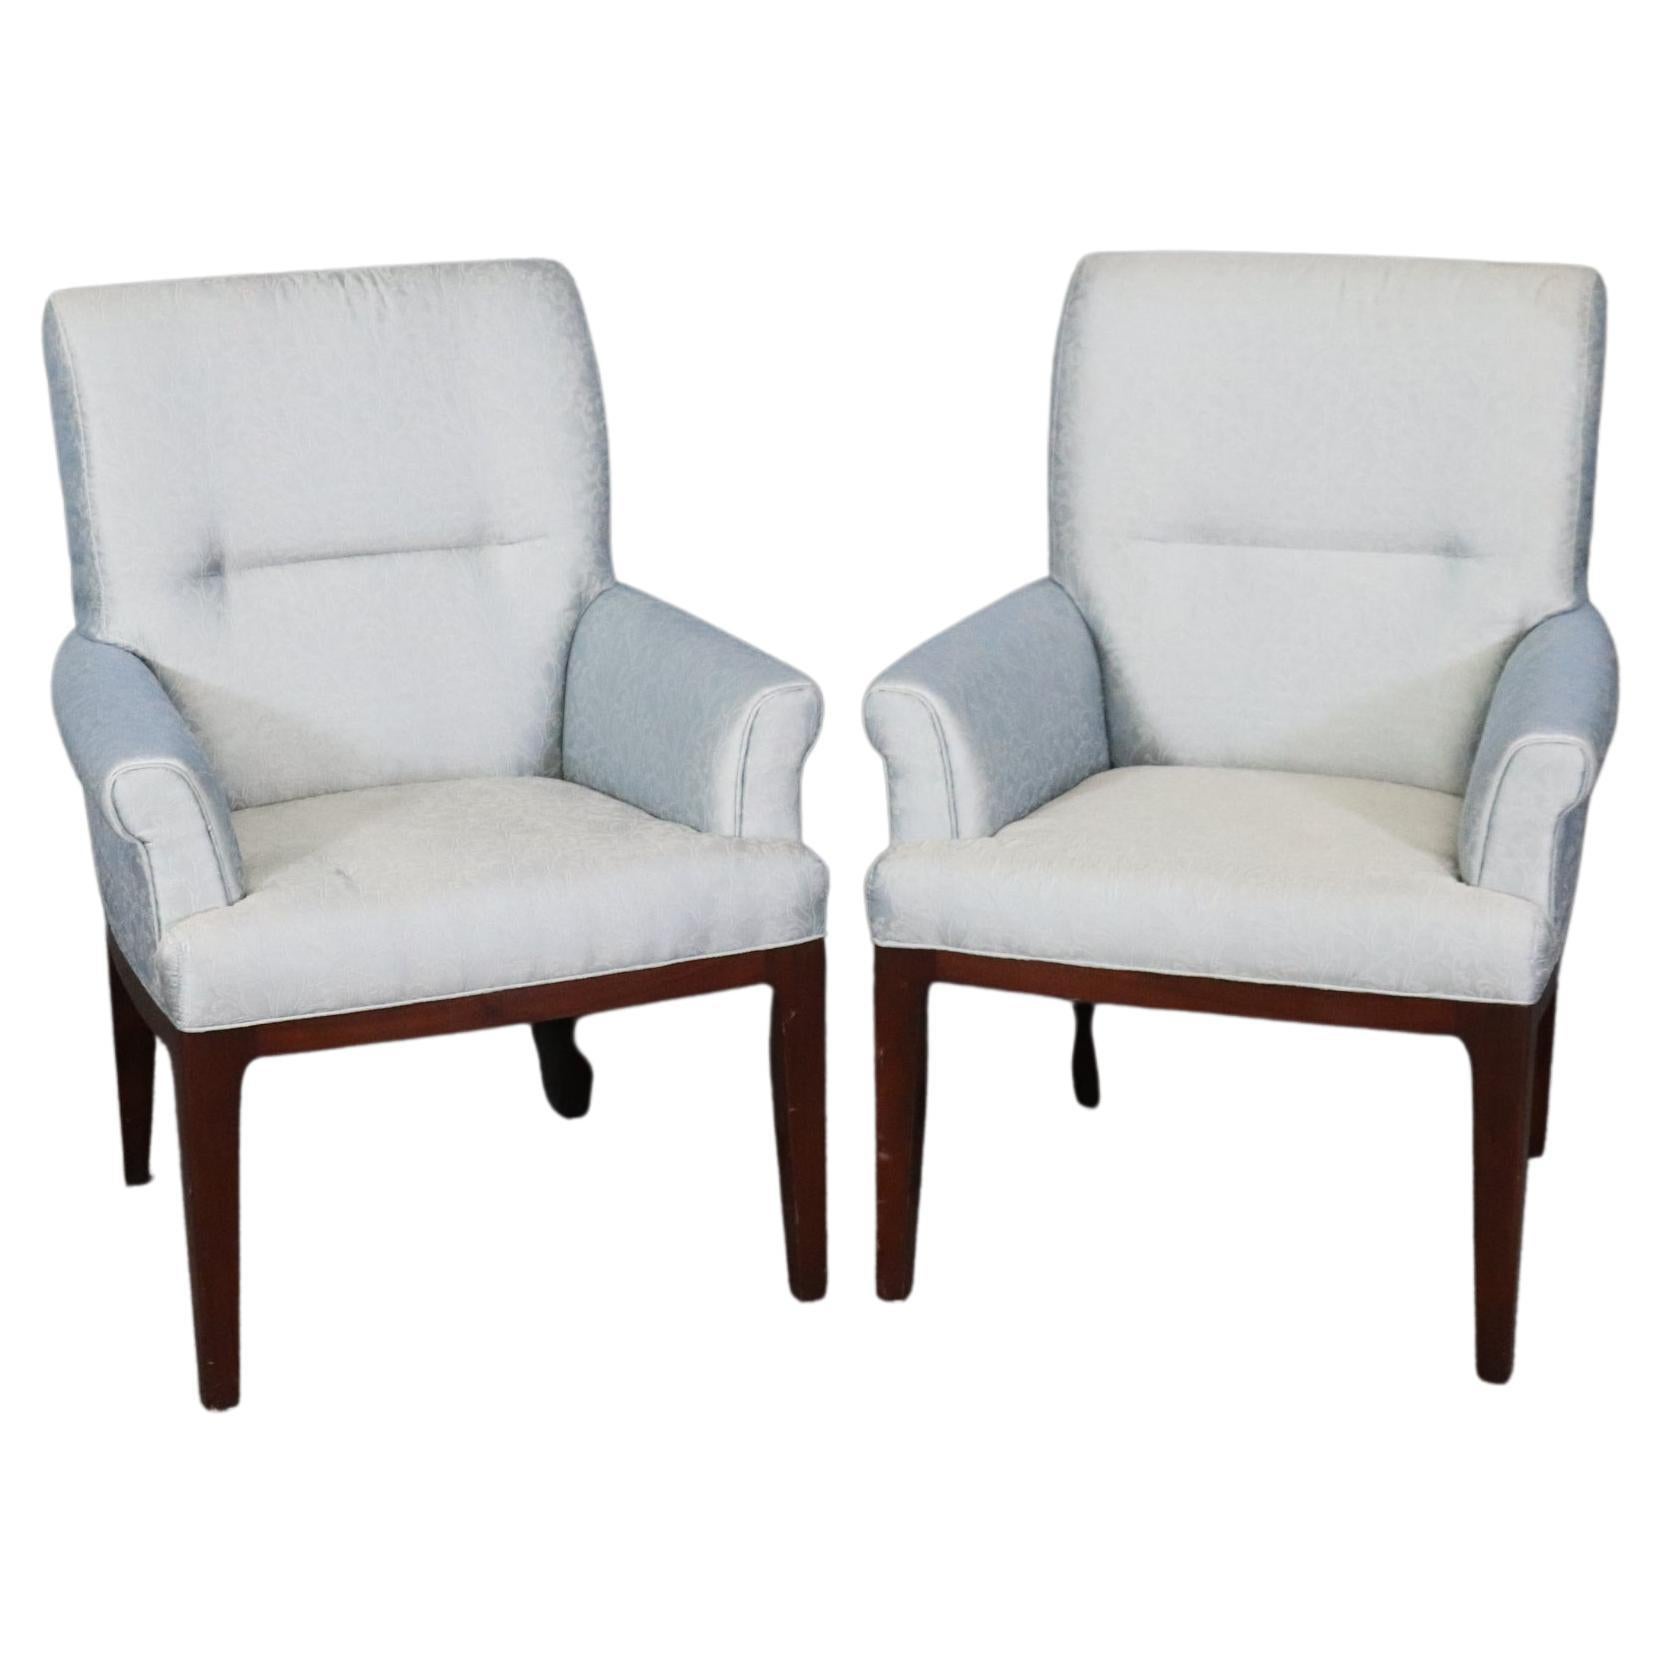 Pair of Baker Furniture Mahogany Mid Century Modern Bergere Dining Chairs 